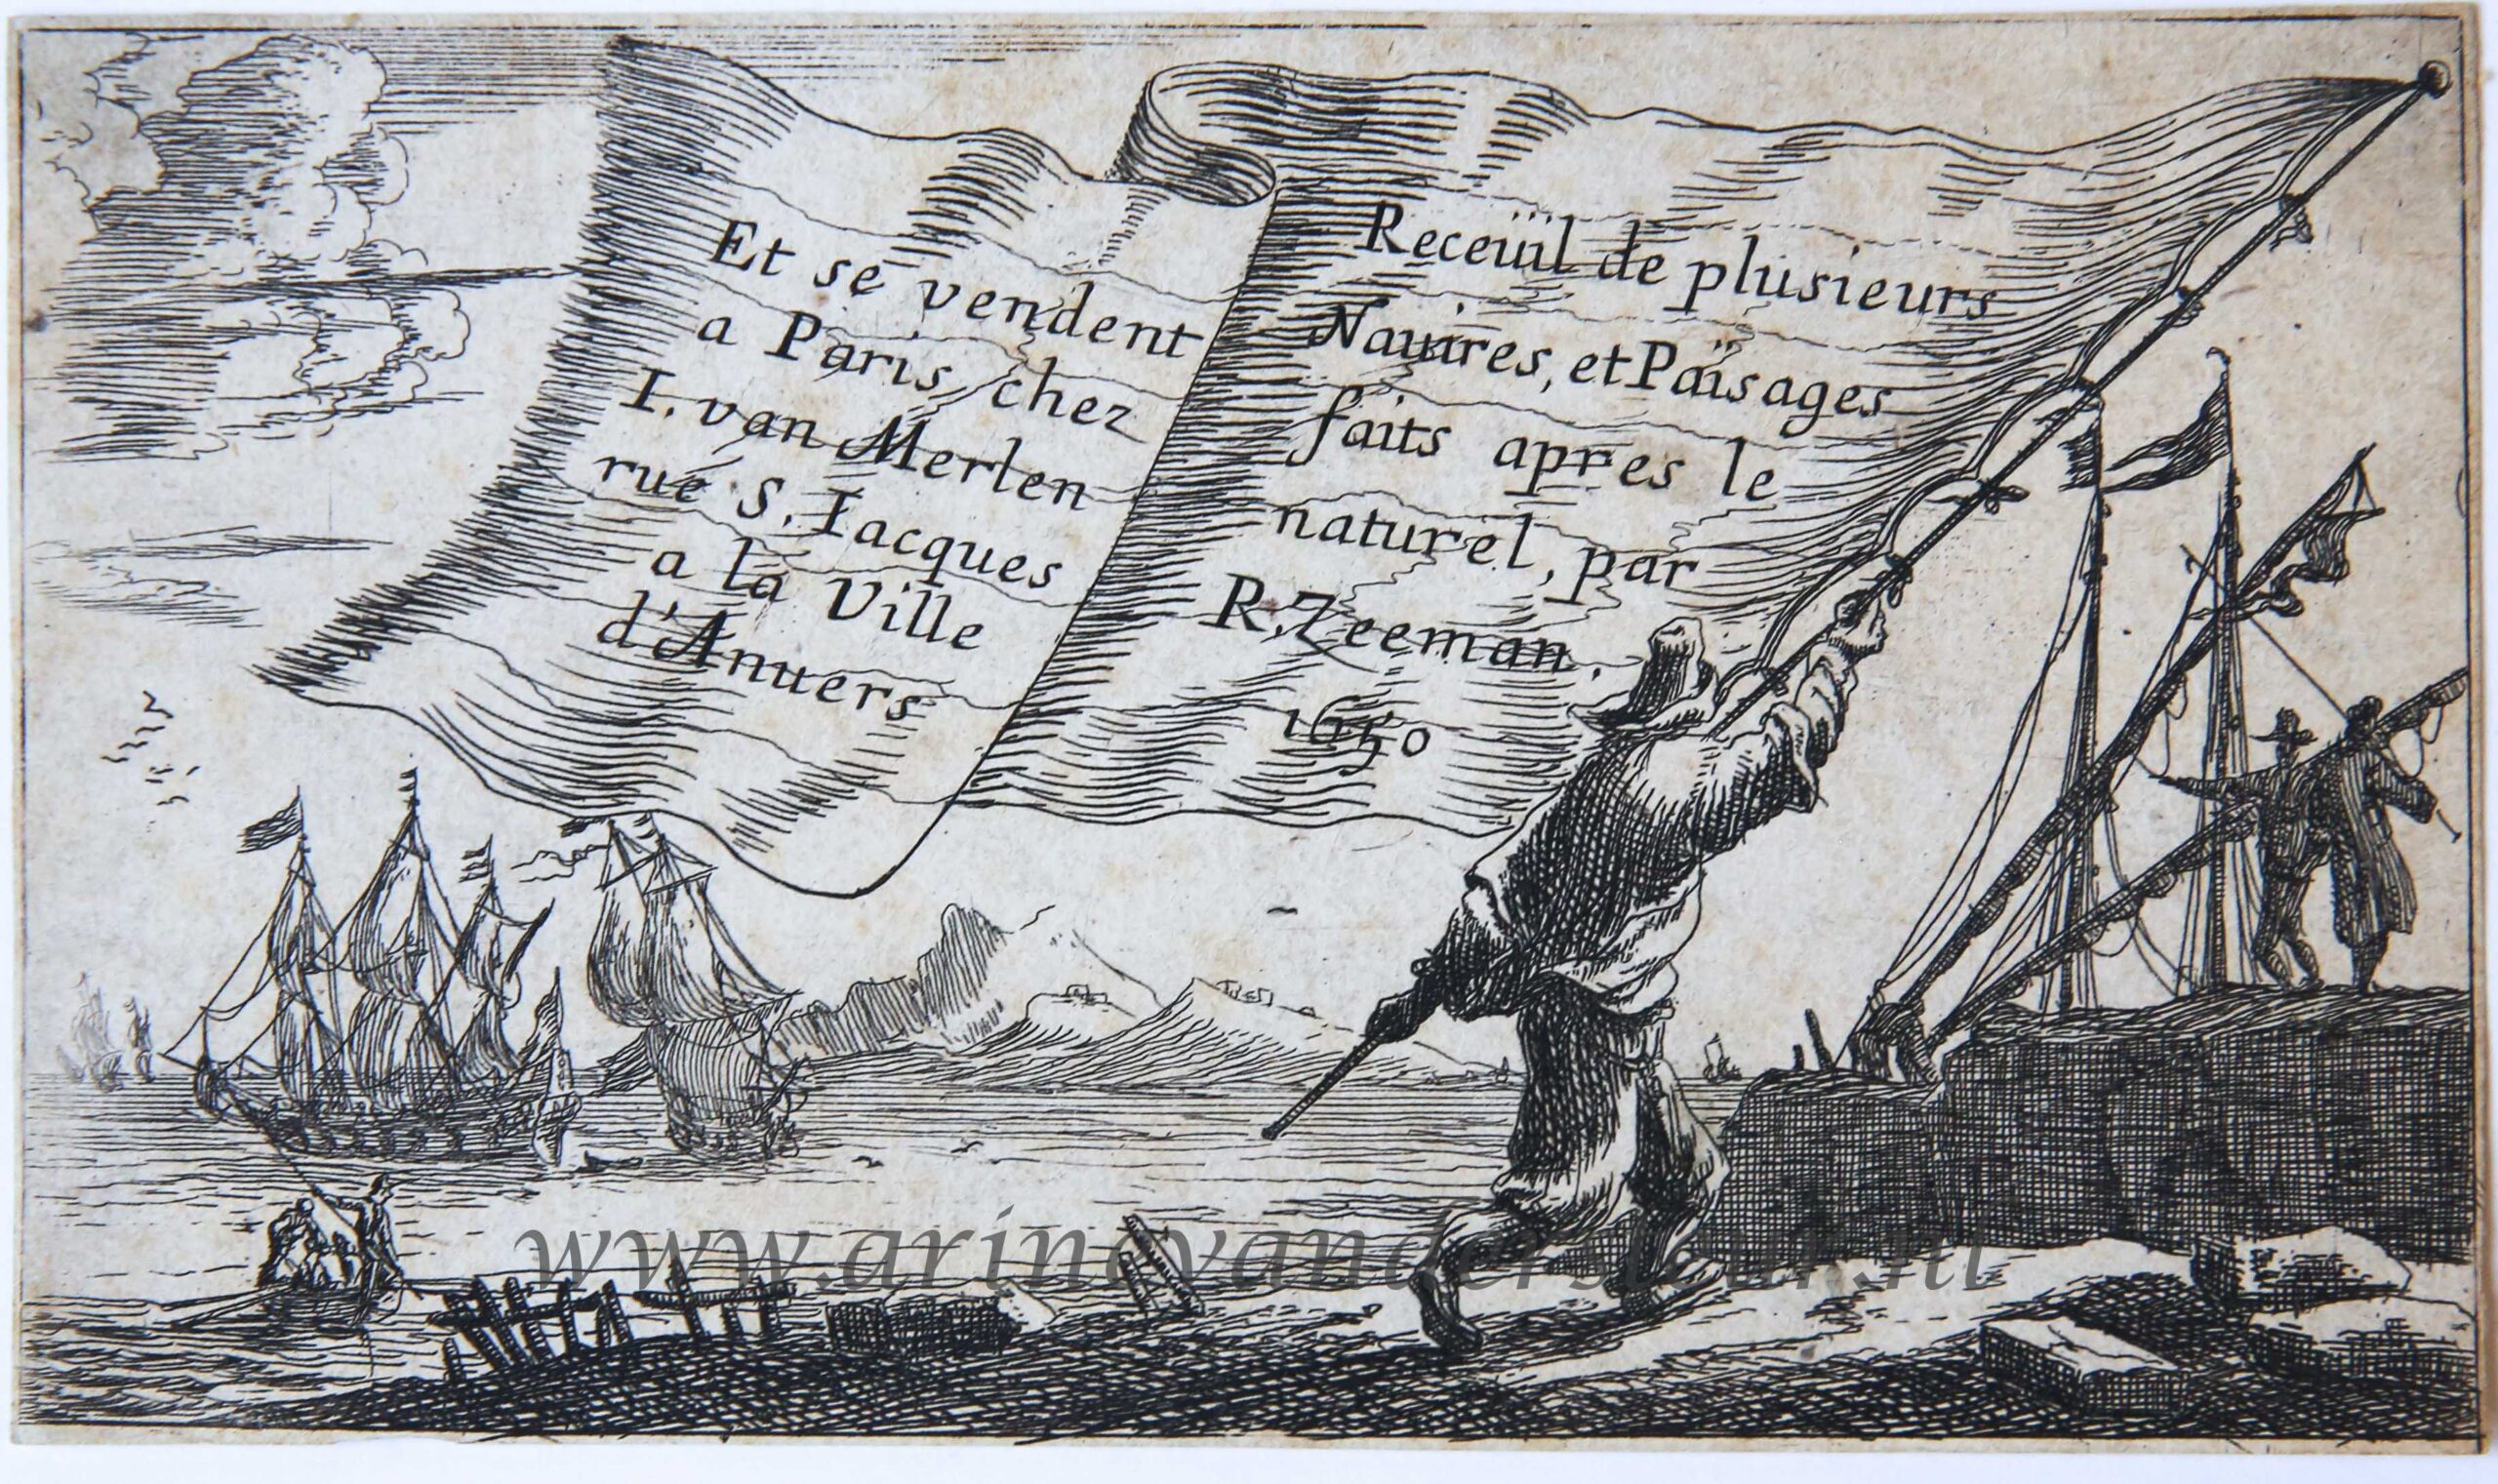 [Antique print, etching] Sailor walking with a large flag, published 1650.